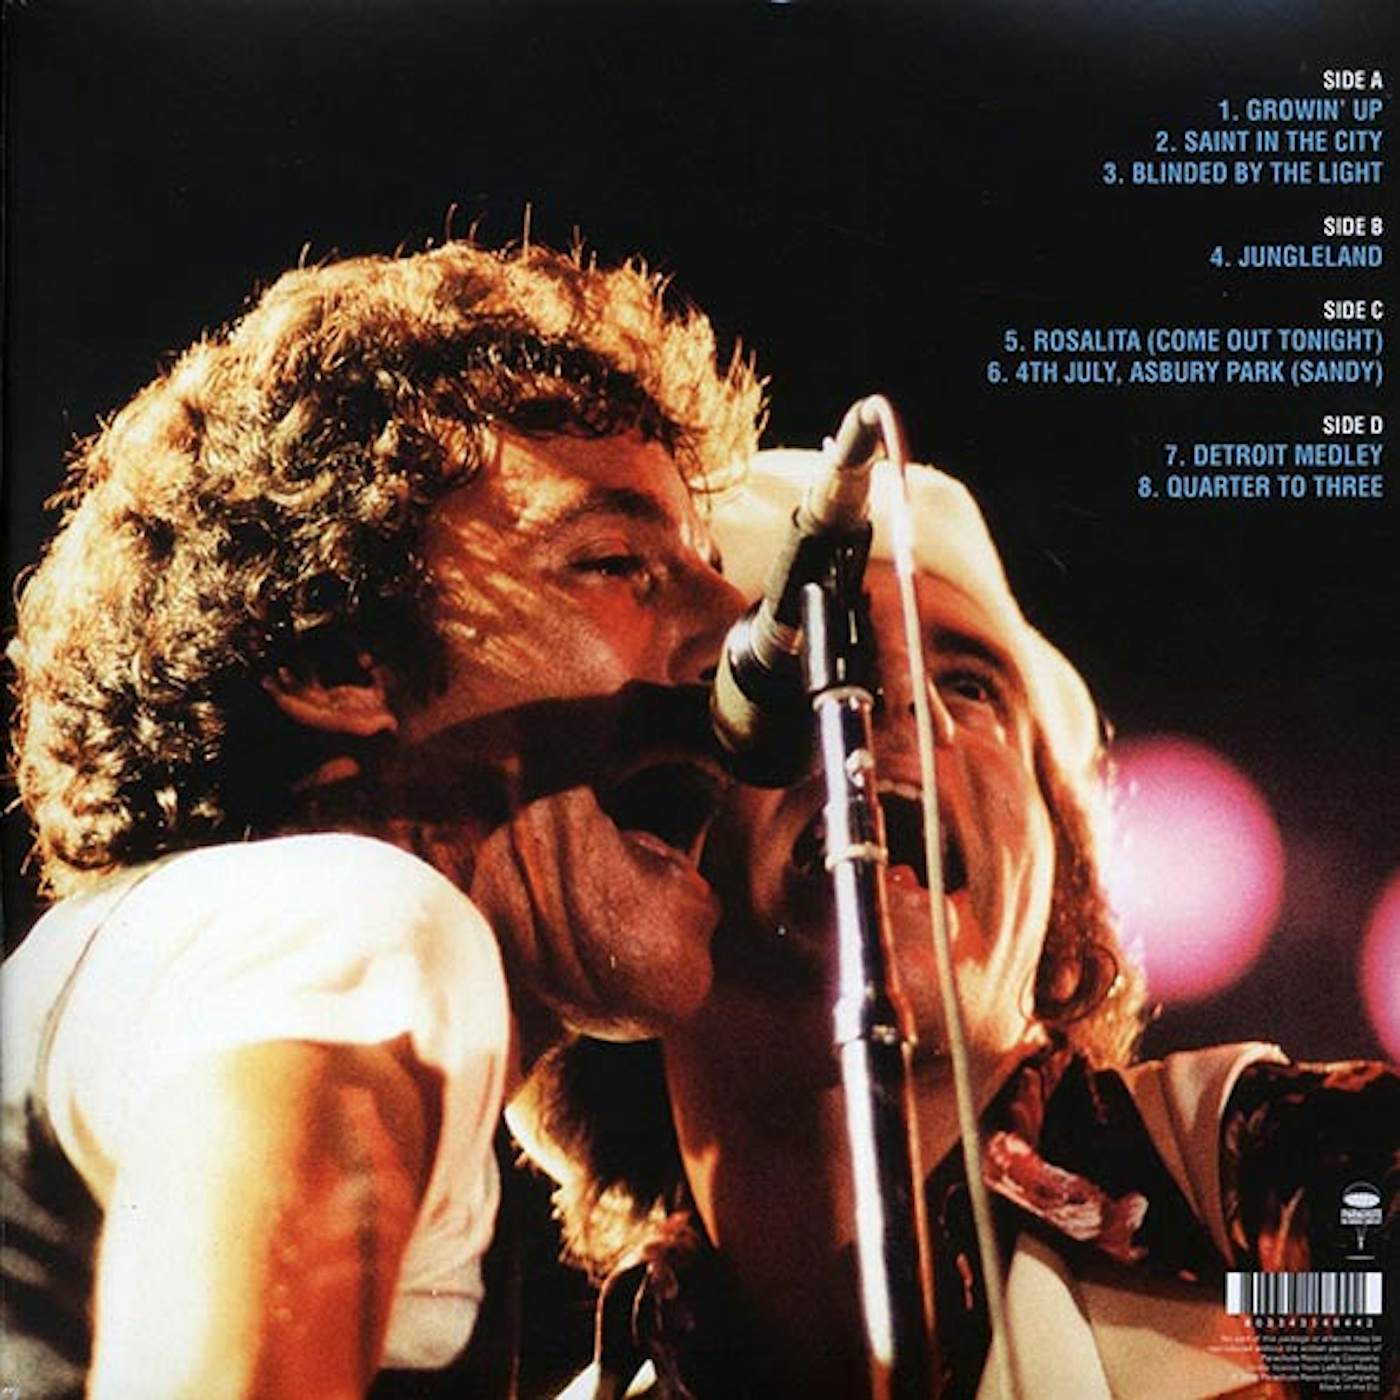 Bruce Springsteen  LP -  The Gap Year Broadcast Volume 2: Live In Cleveland 7th April 1976 (2xLP) (Vinyl)